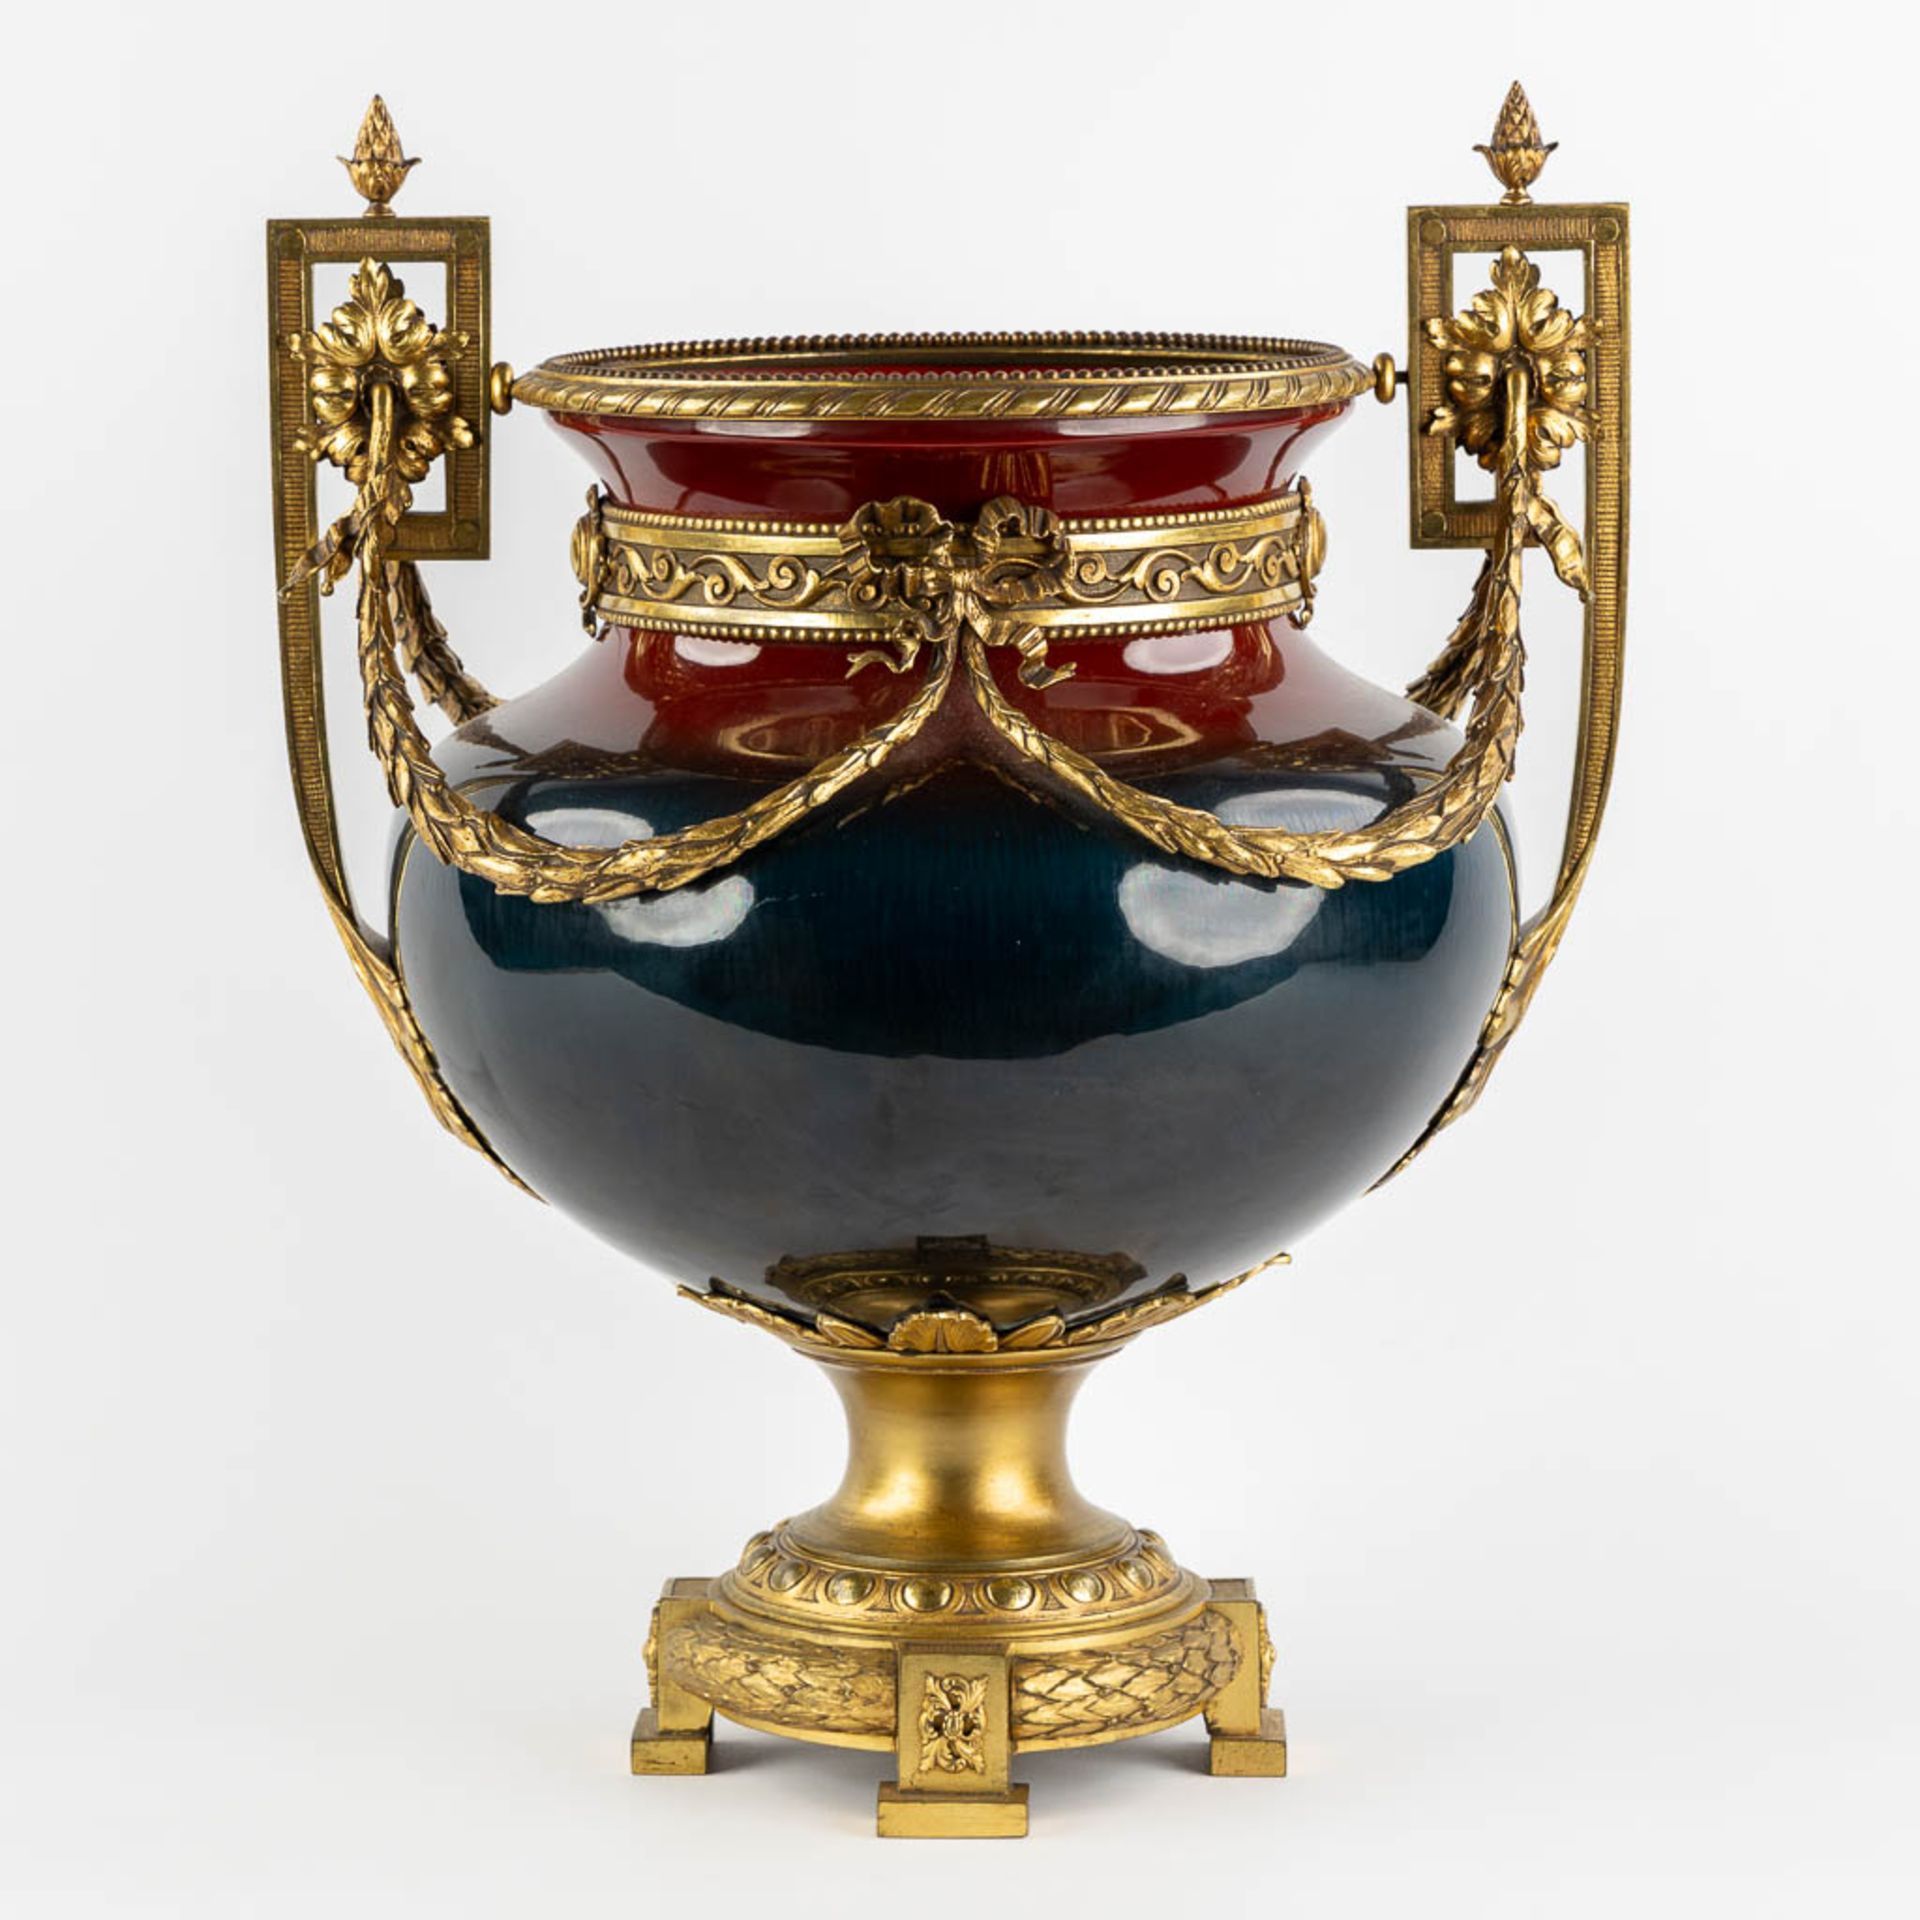 A large faience vase mounted with gilt bronze in Louis XV style. Circa 1900. (L:34 x W:40 x H:50 cm) - Image 5 of 12